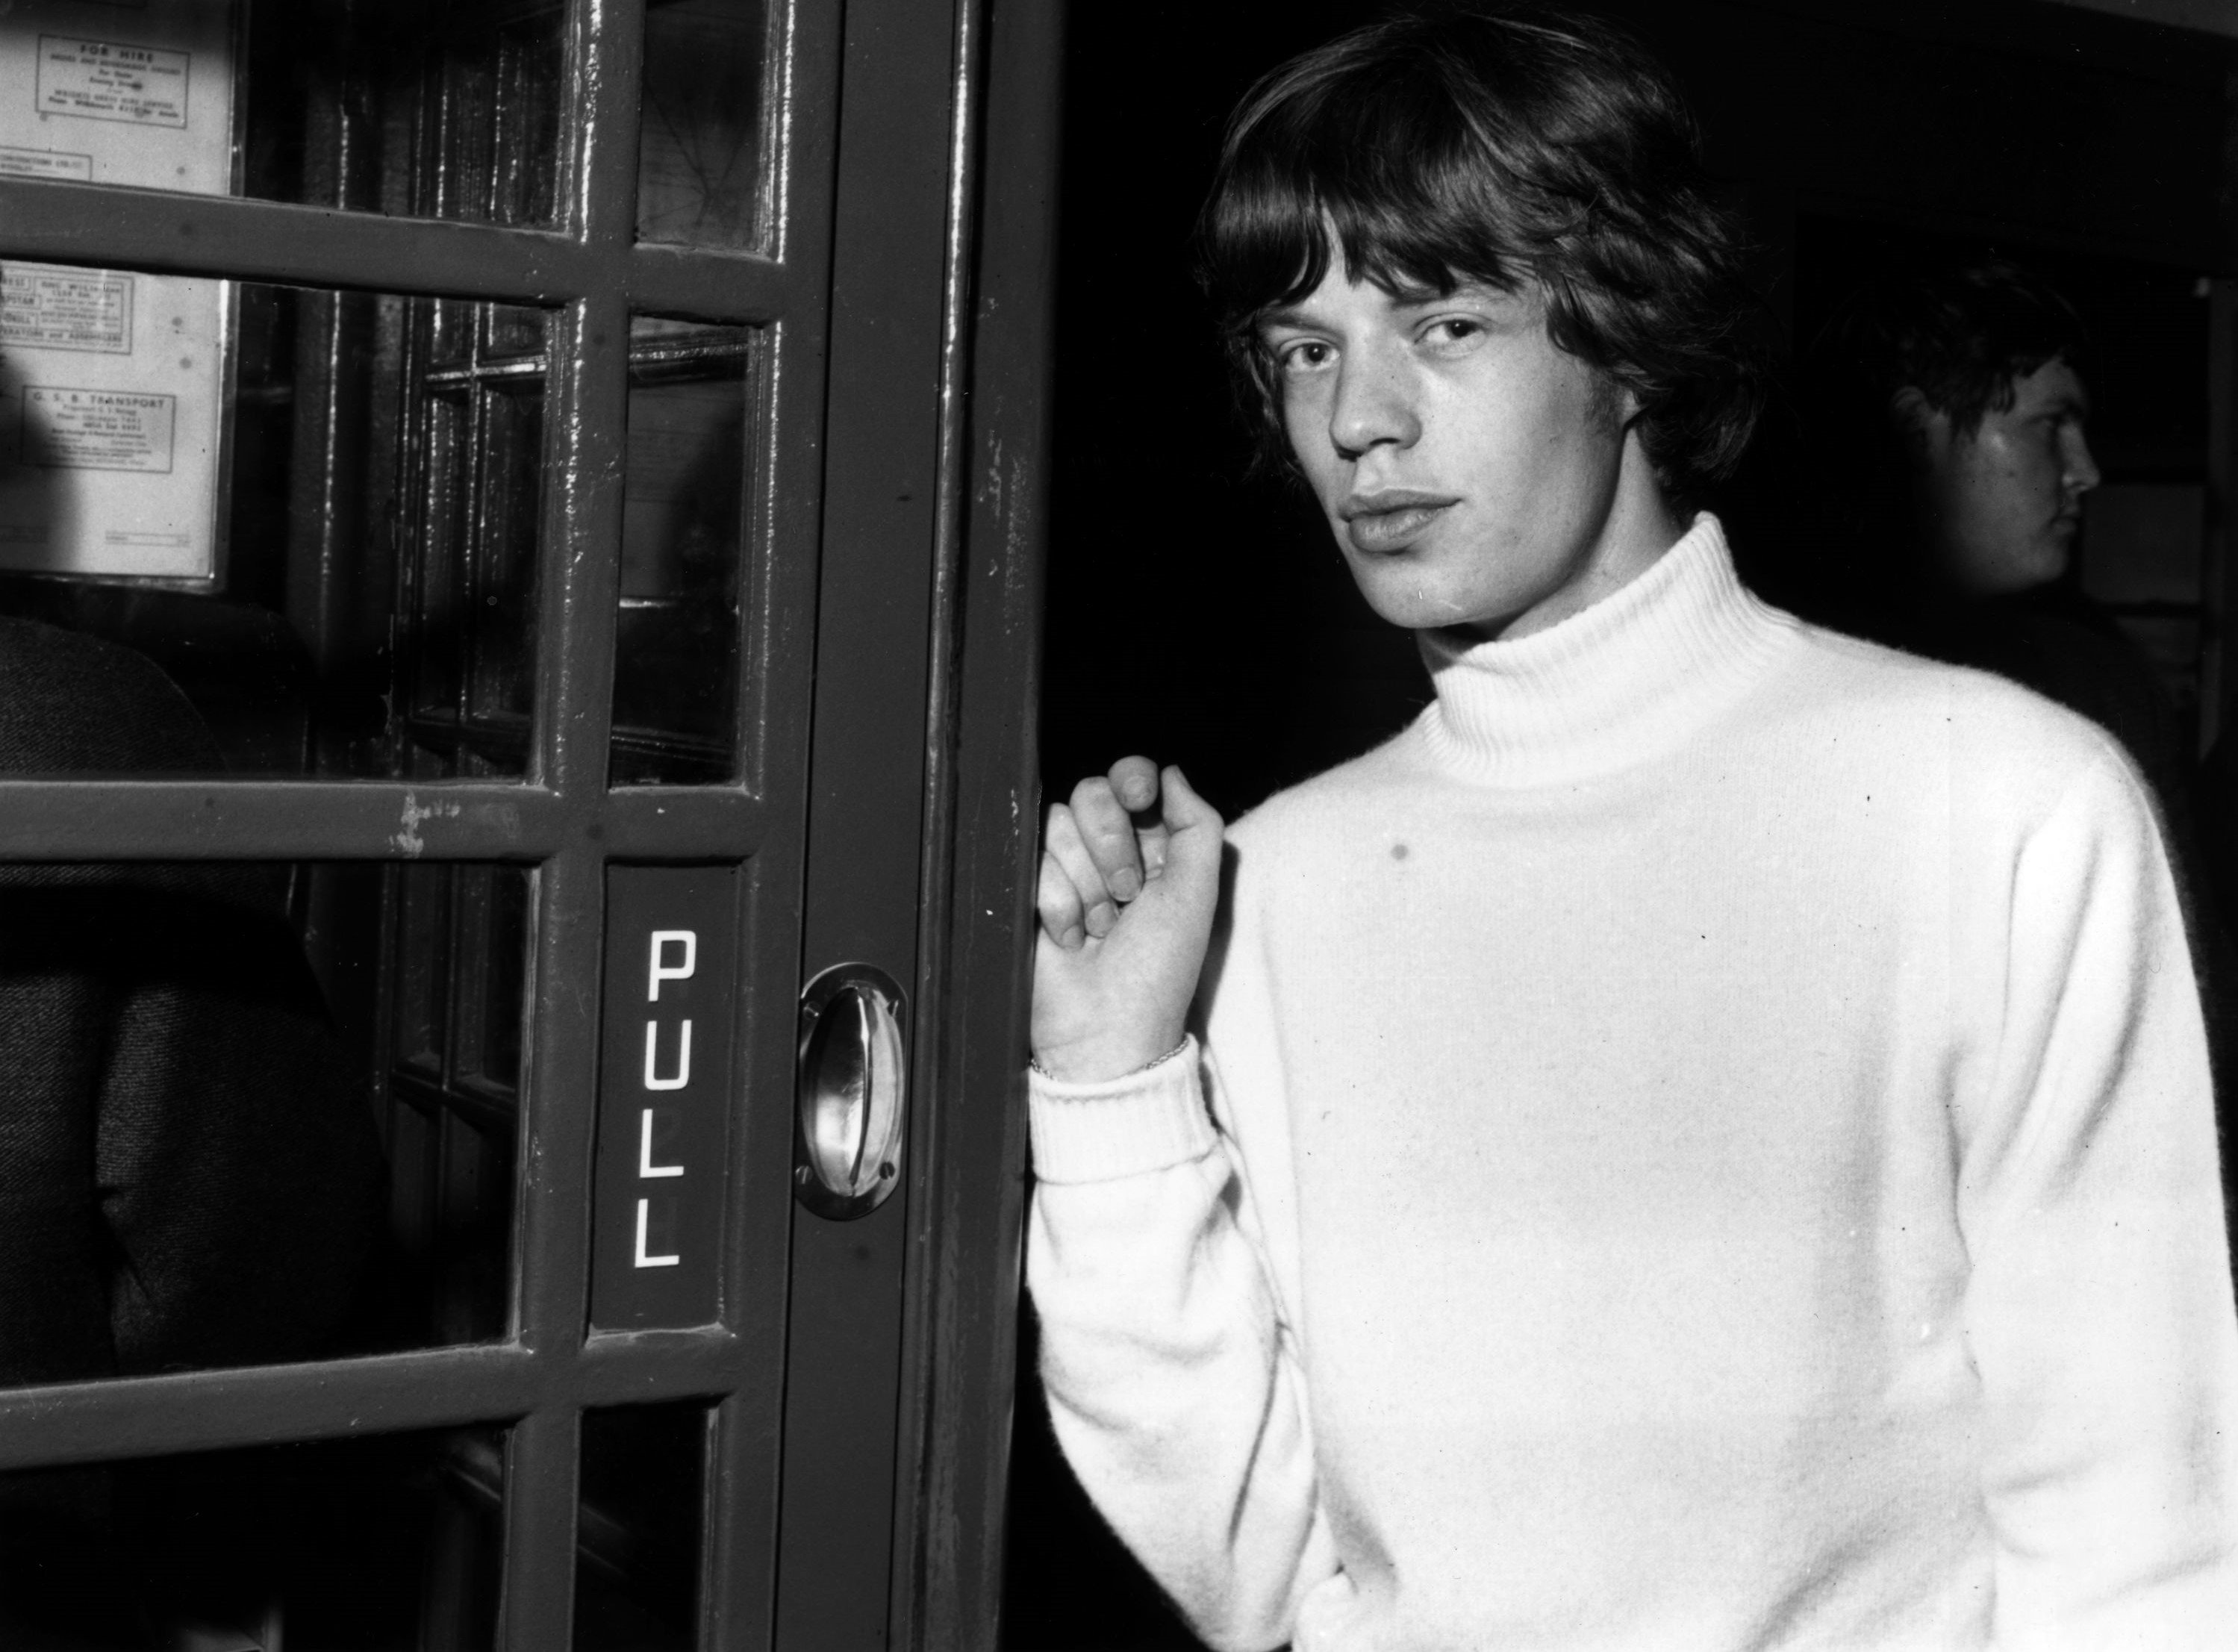 Mick Jagger wearing a sweater during The Rolling Stones' "You Can't Always Get What You Want" era